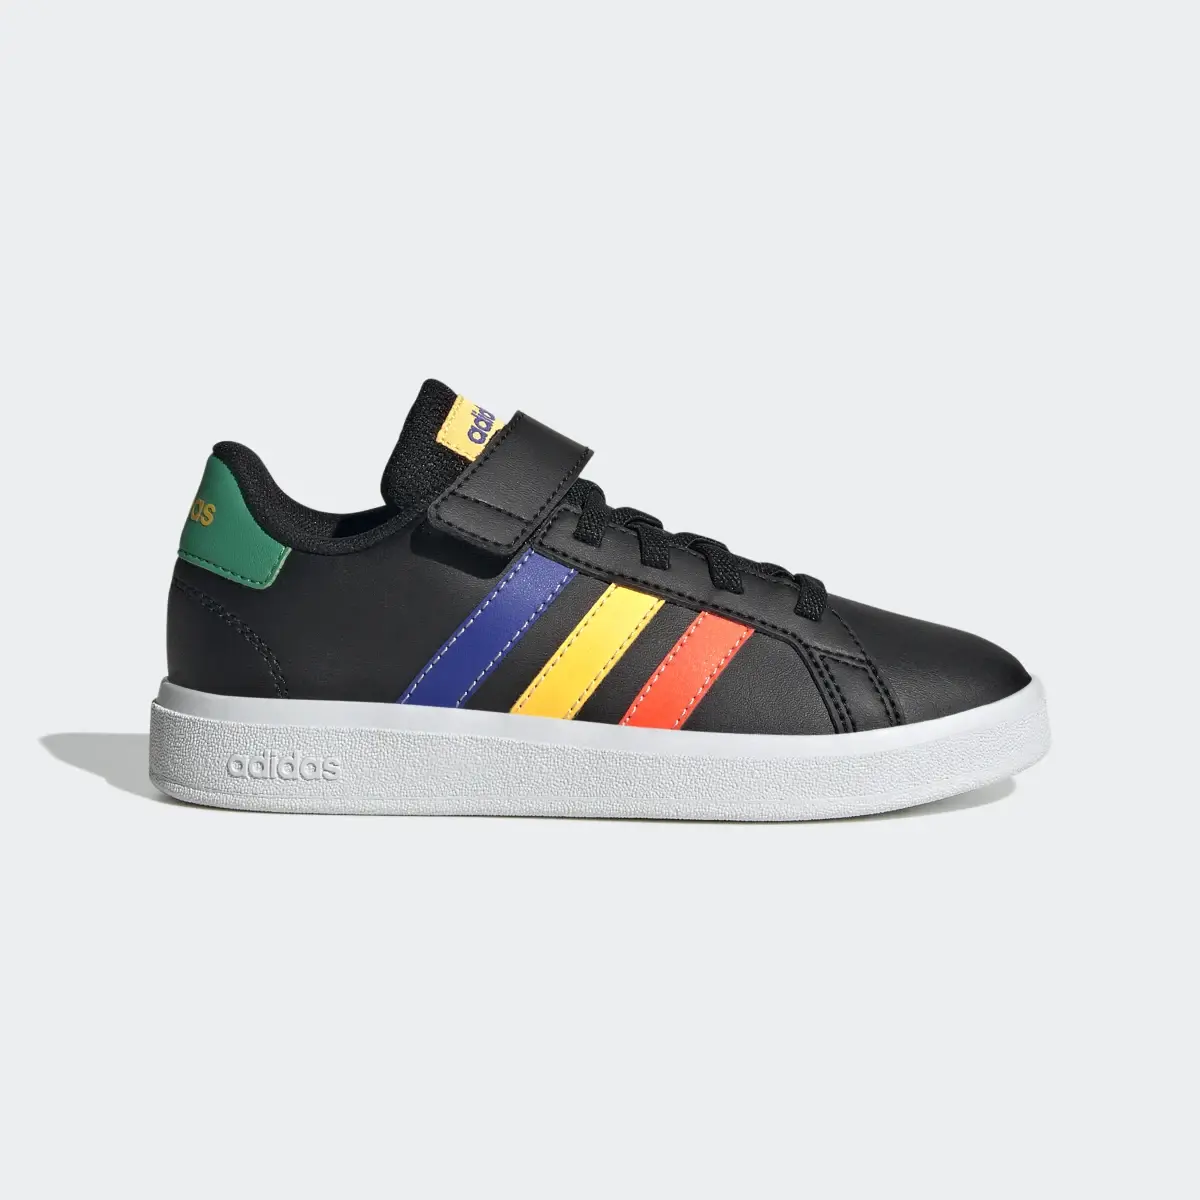 Adidas Grand Court Elastic Lace and Top Strap Shoes. 2